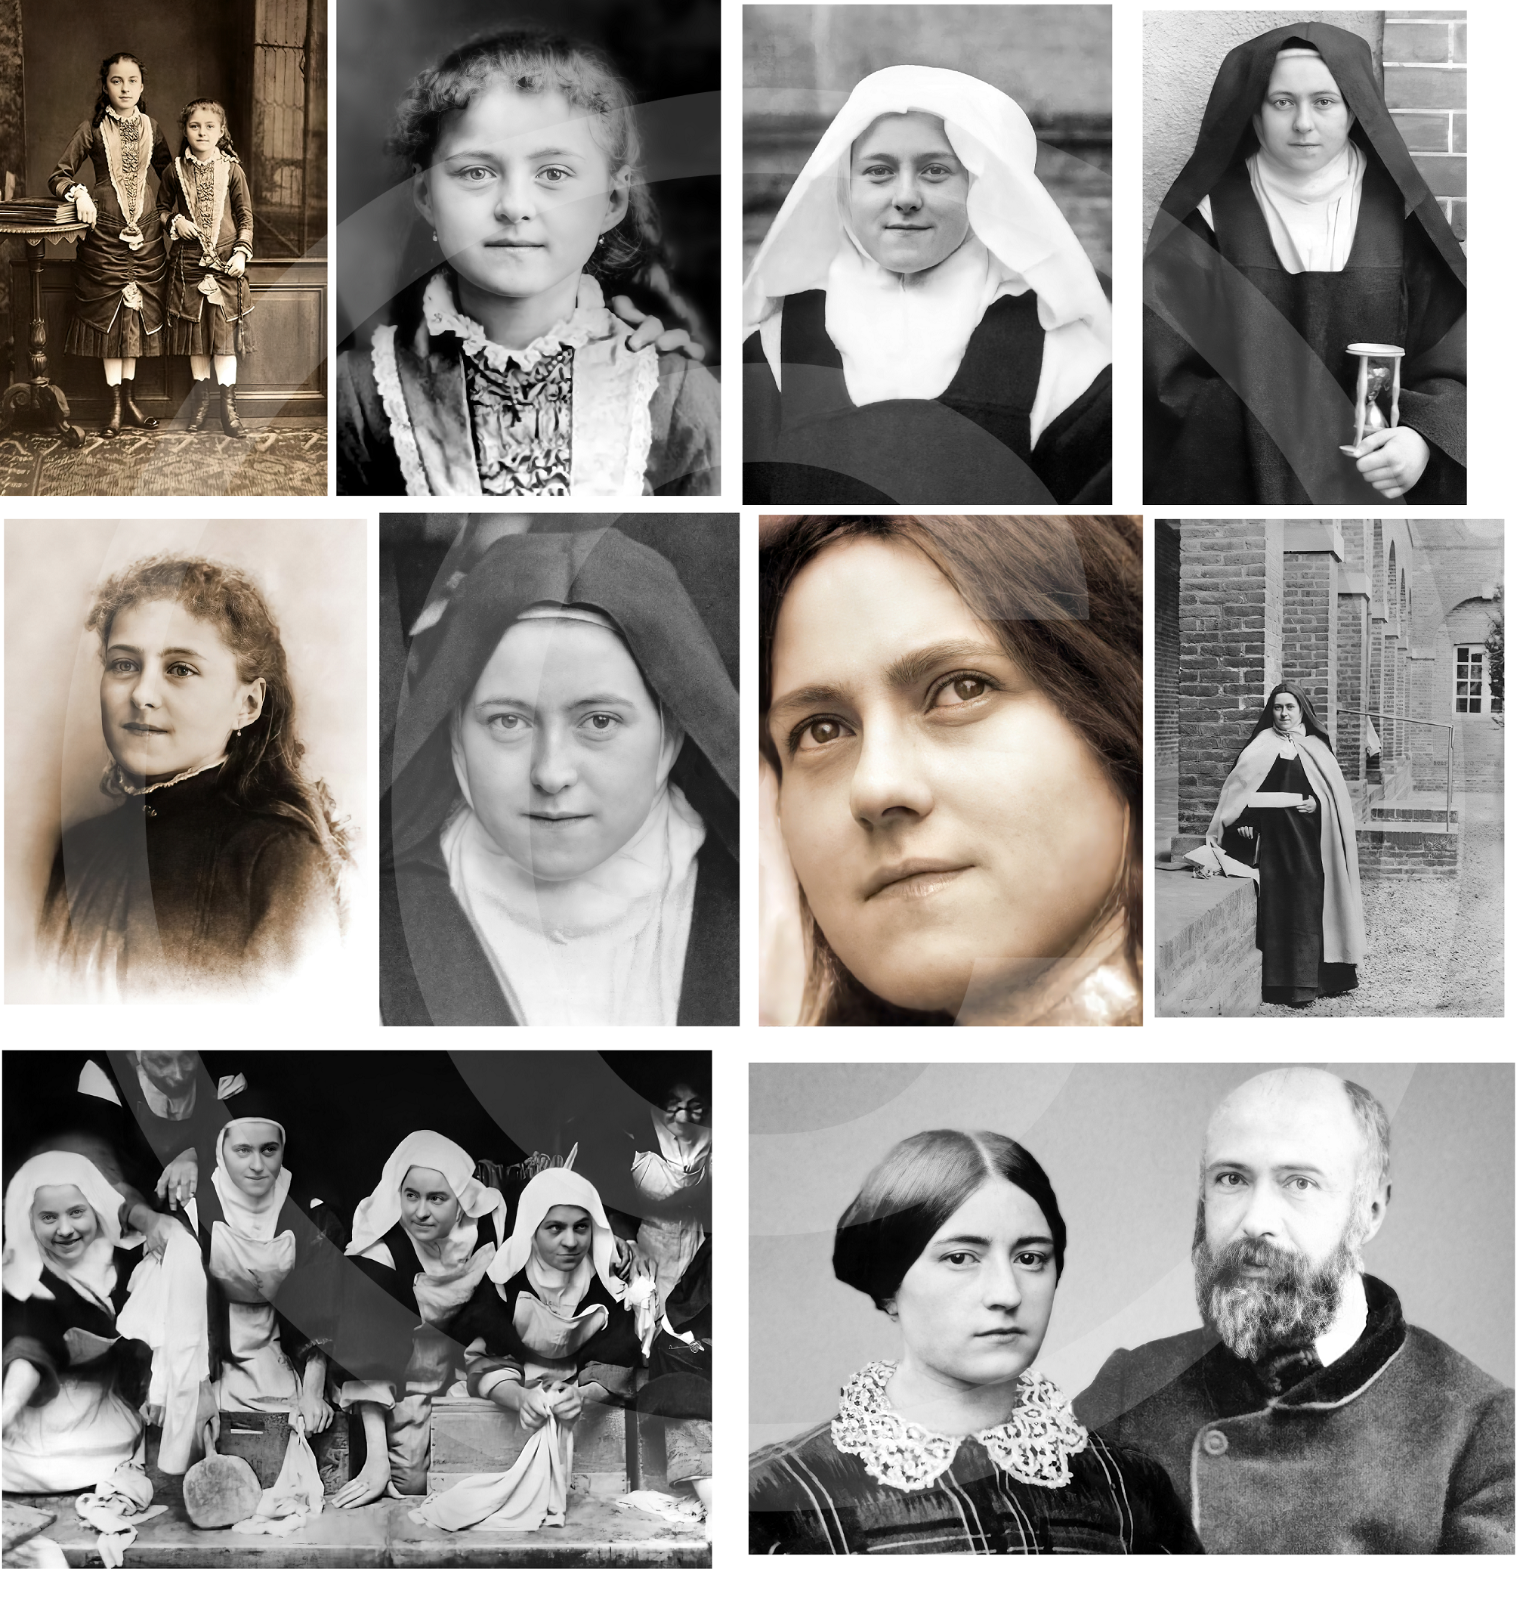 St. Therese and Family – 10 different Restored Photos! Exclusive! – each 8.5x11